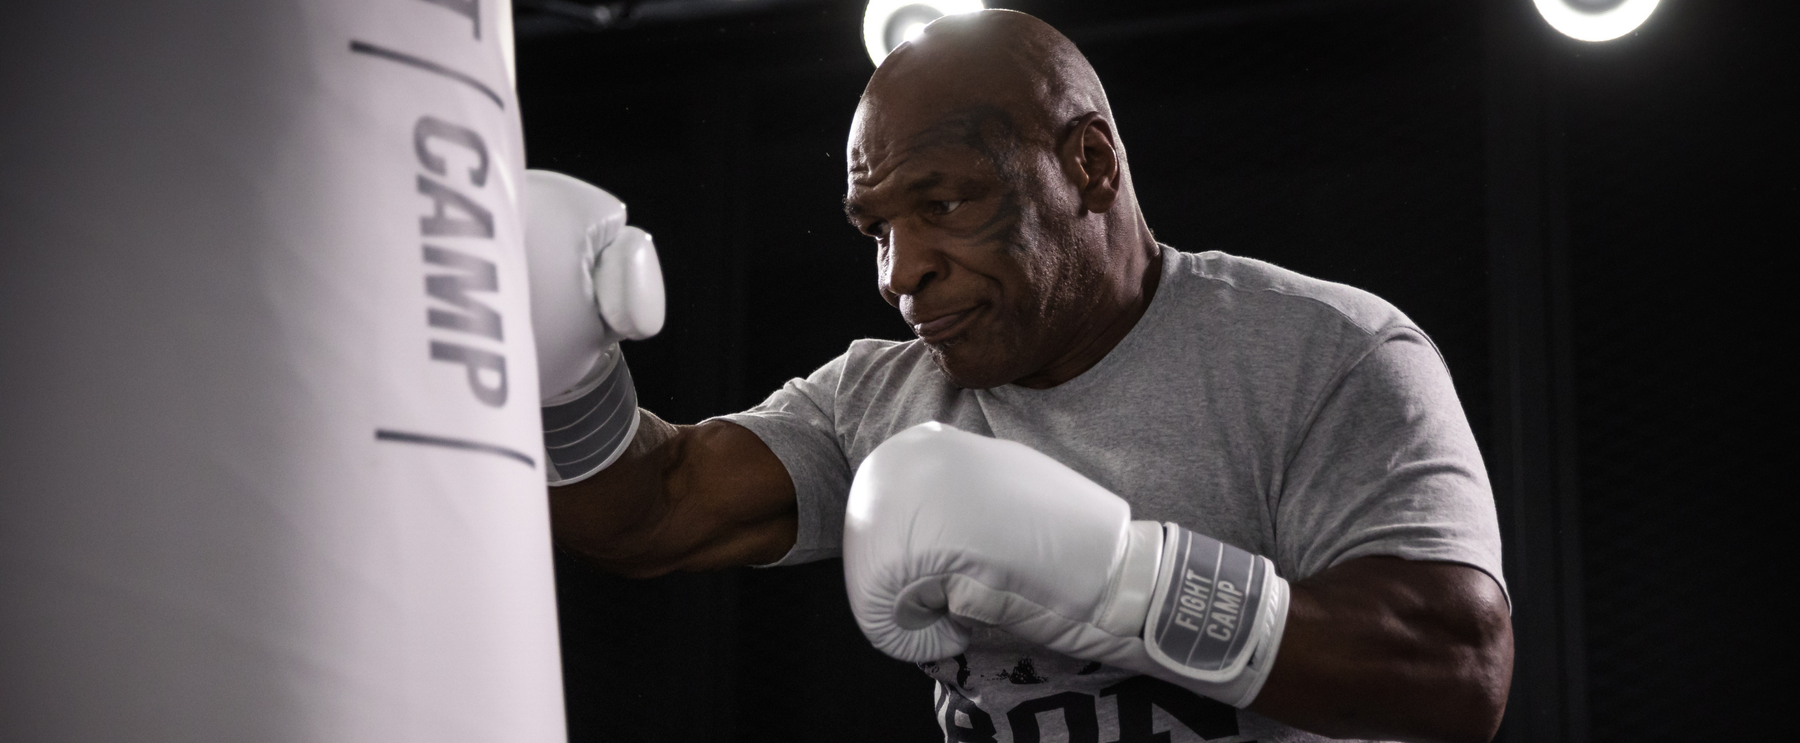 Why Mike Tyson & Many Others Consider Exercise As Medicine